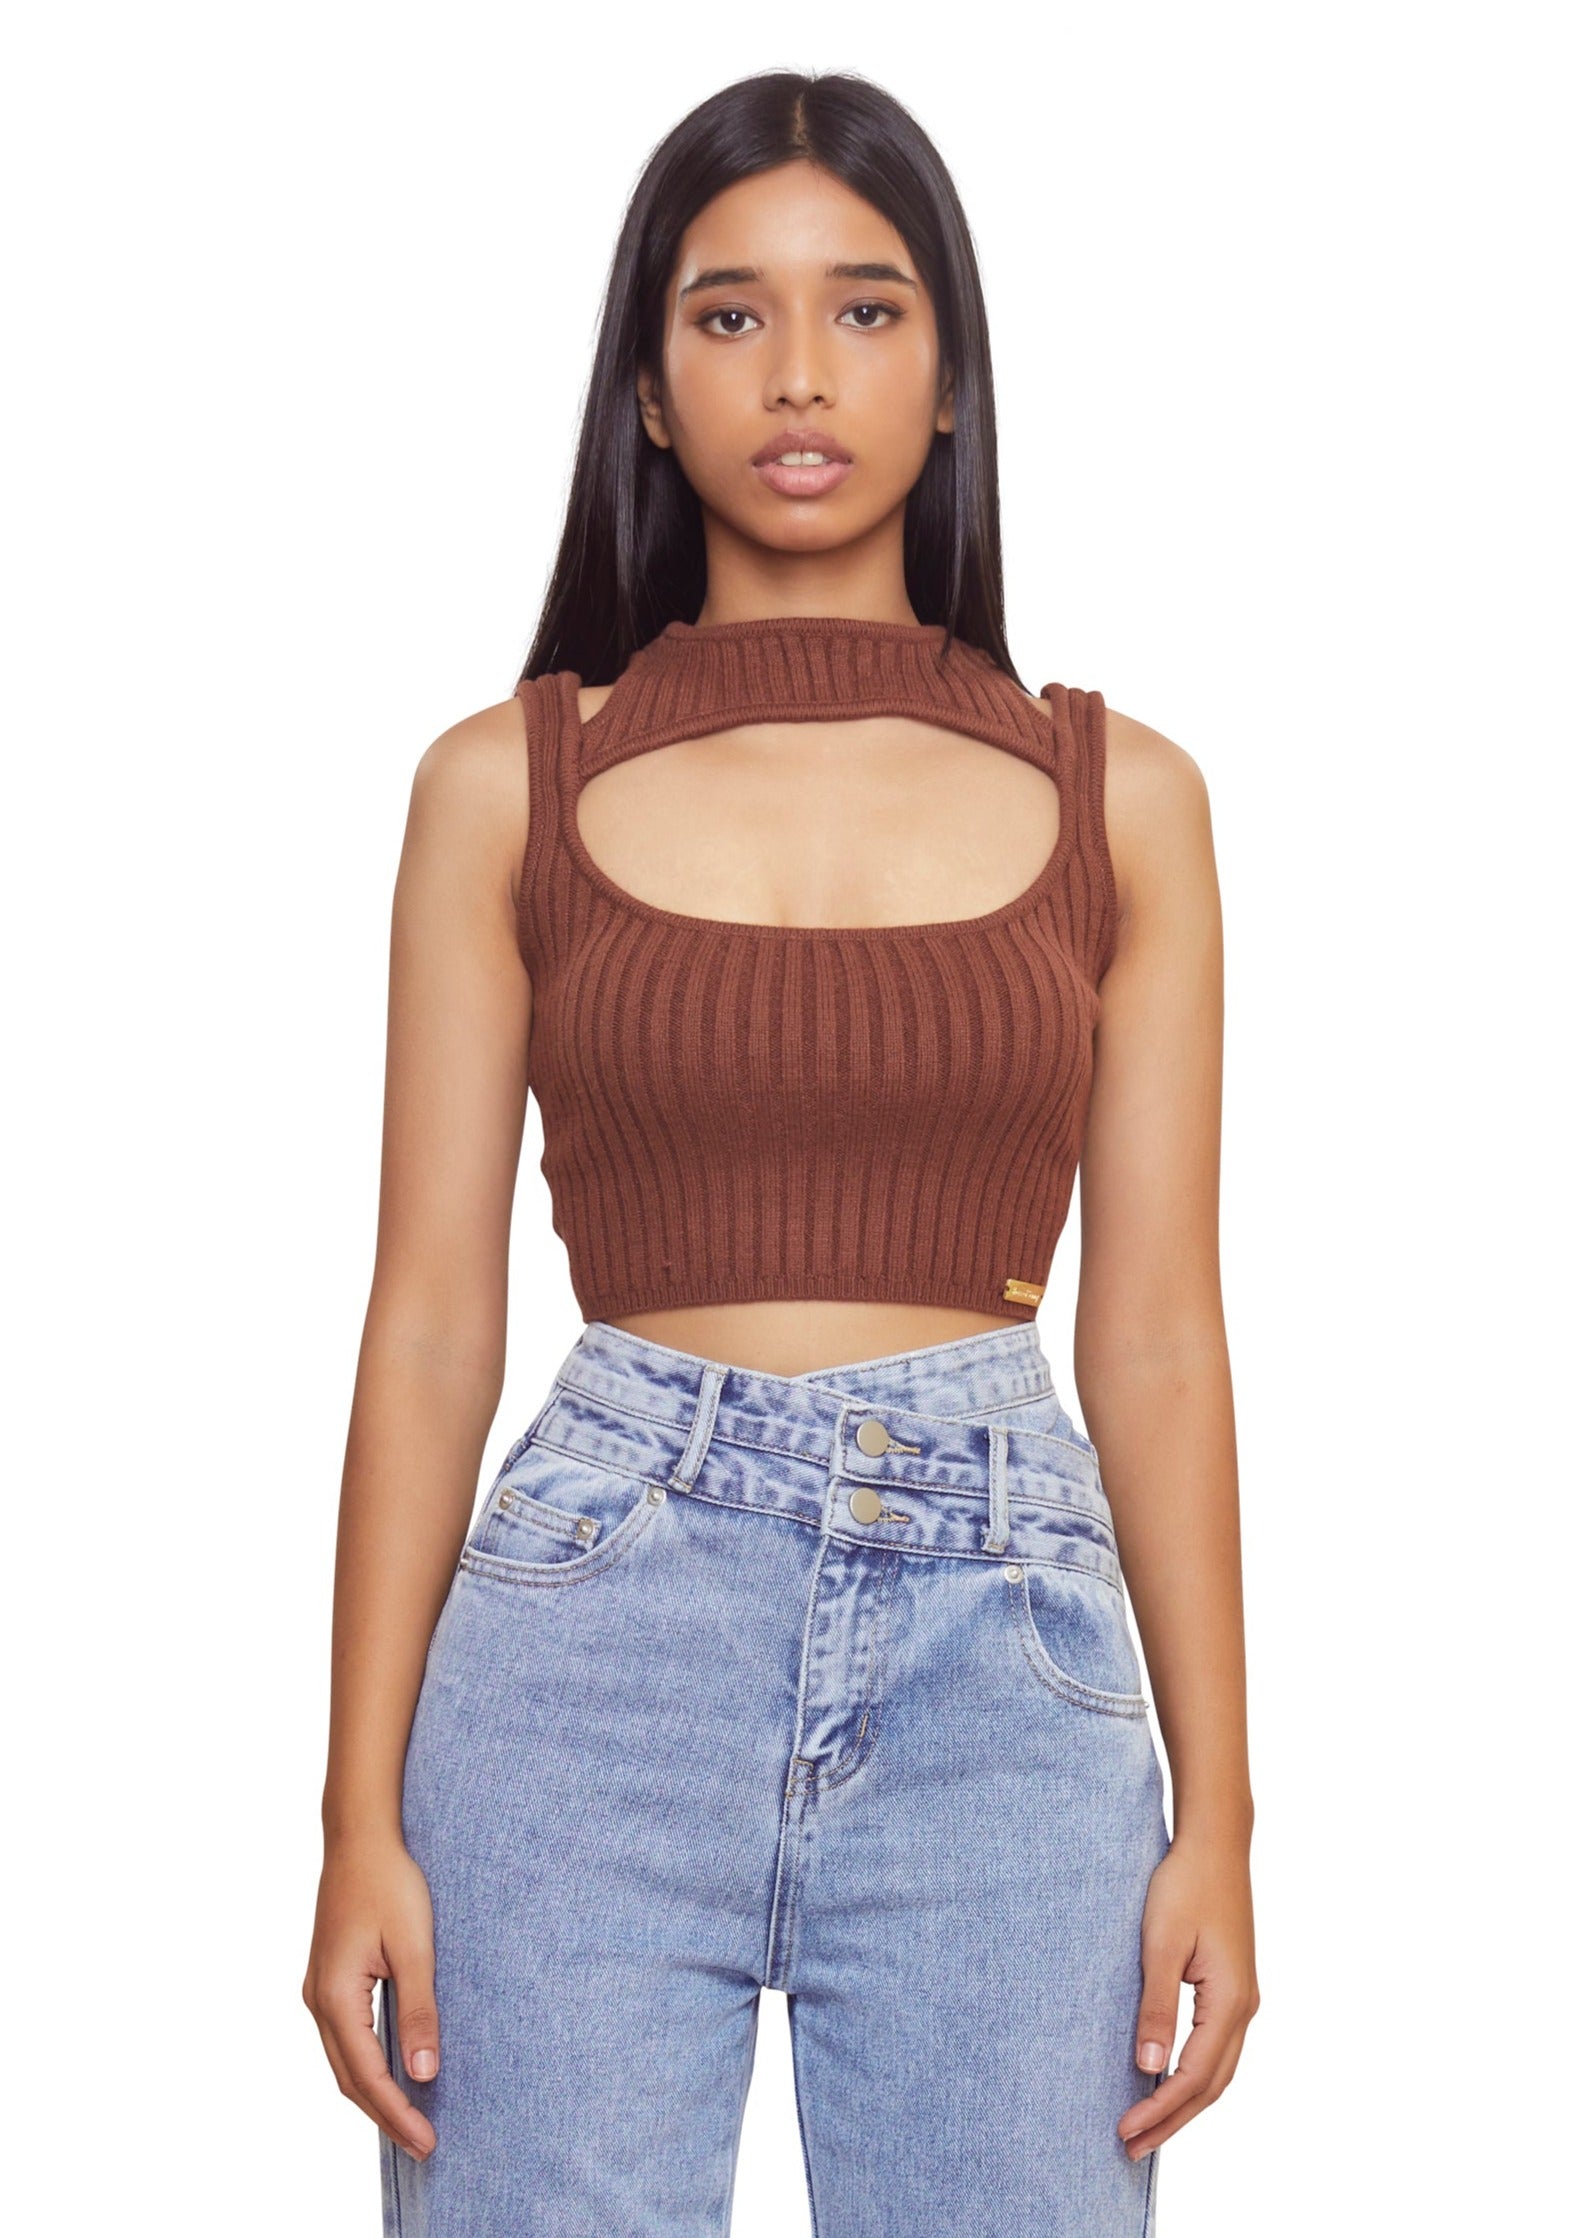 Brown Ripped crop top with double strap from the brand House of sunny